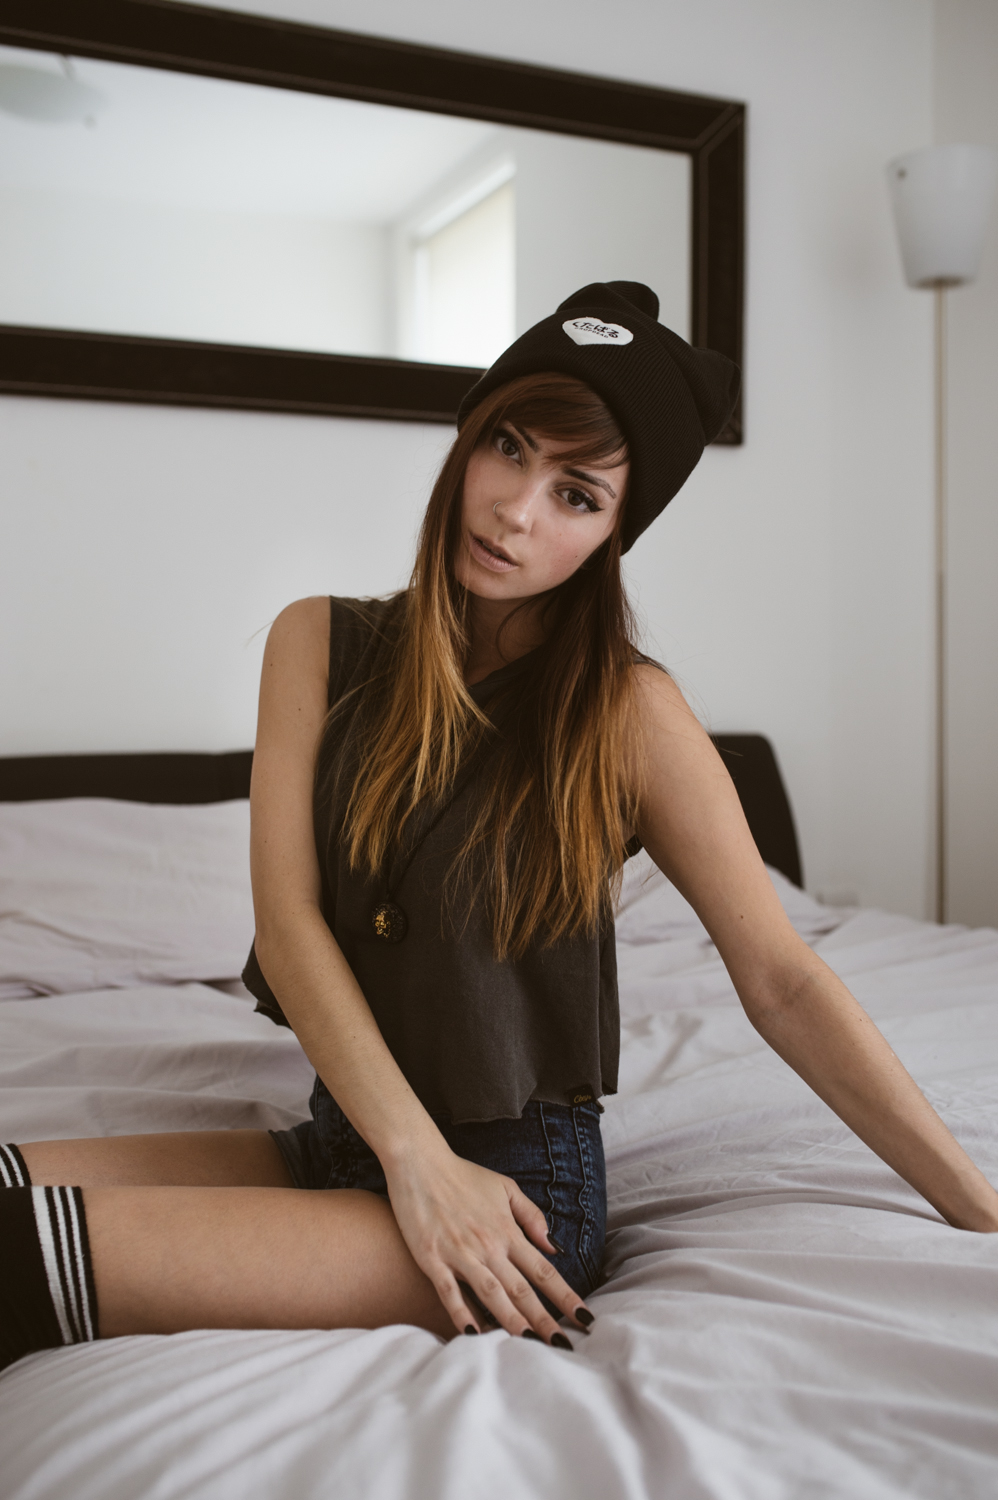 People 998x1500 Hannah Ray women model brunette beanie in bed legs short shorts indoors pierced nose black nails women indoors hat skinny